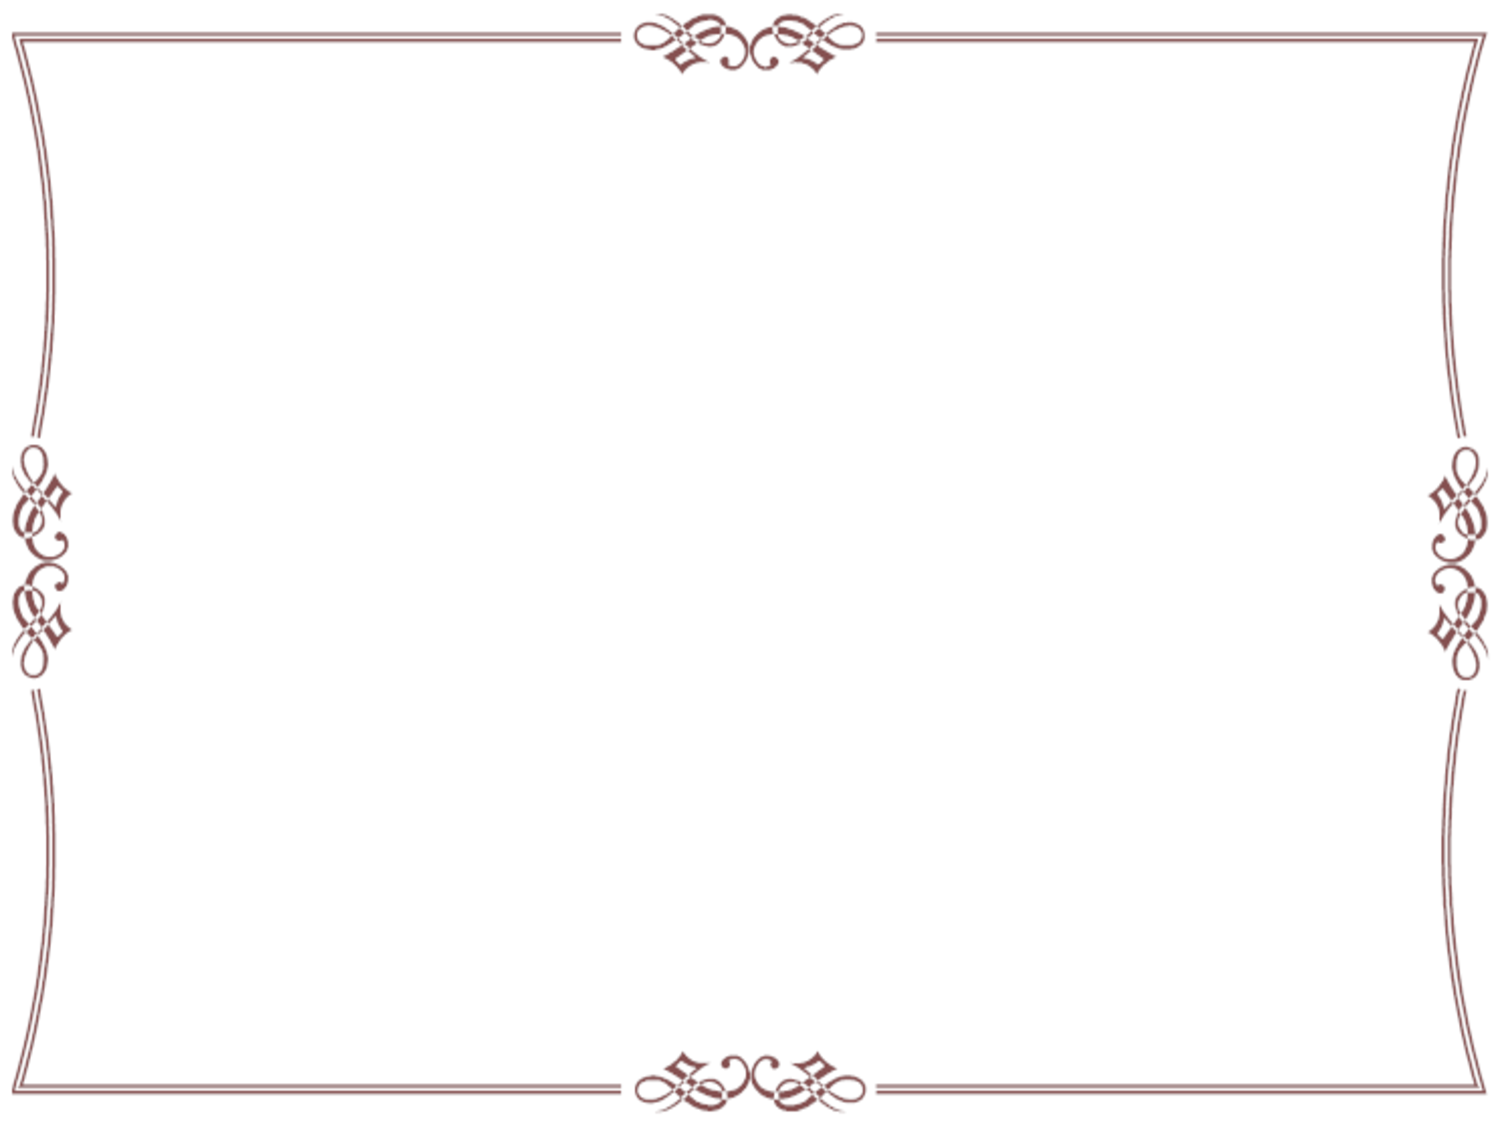 Certificates Borders Free Download - ClipArt Best